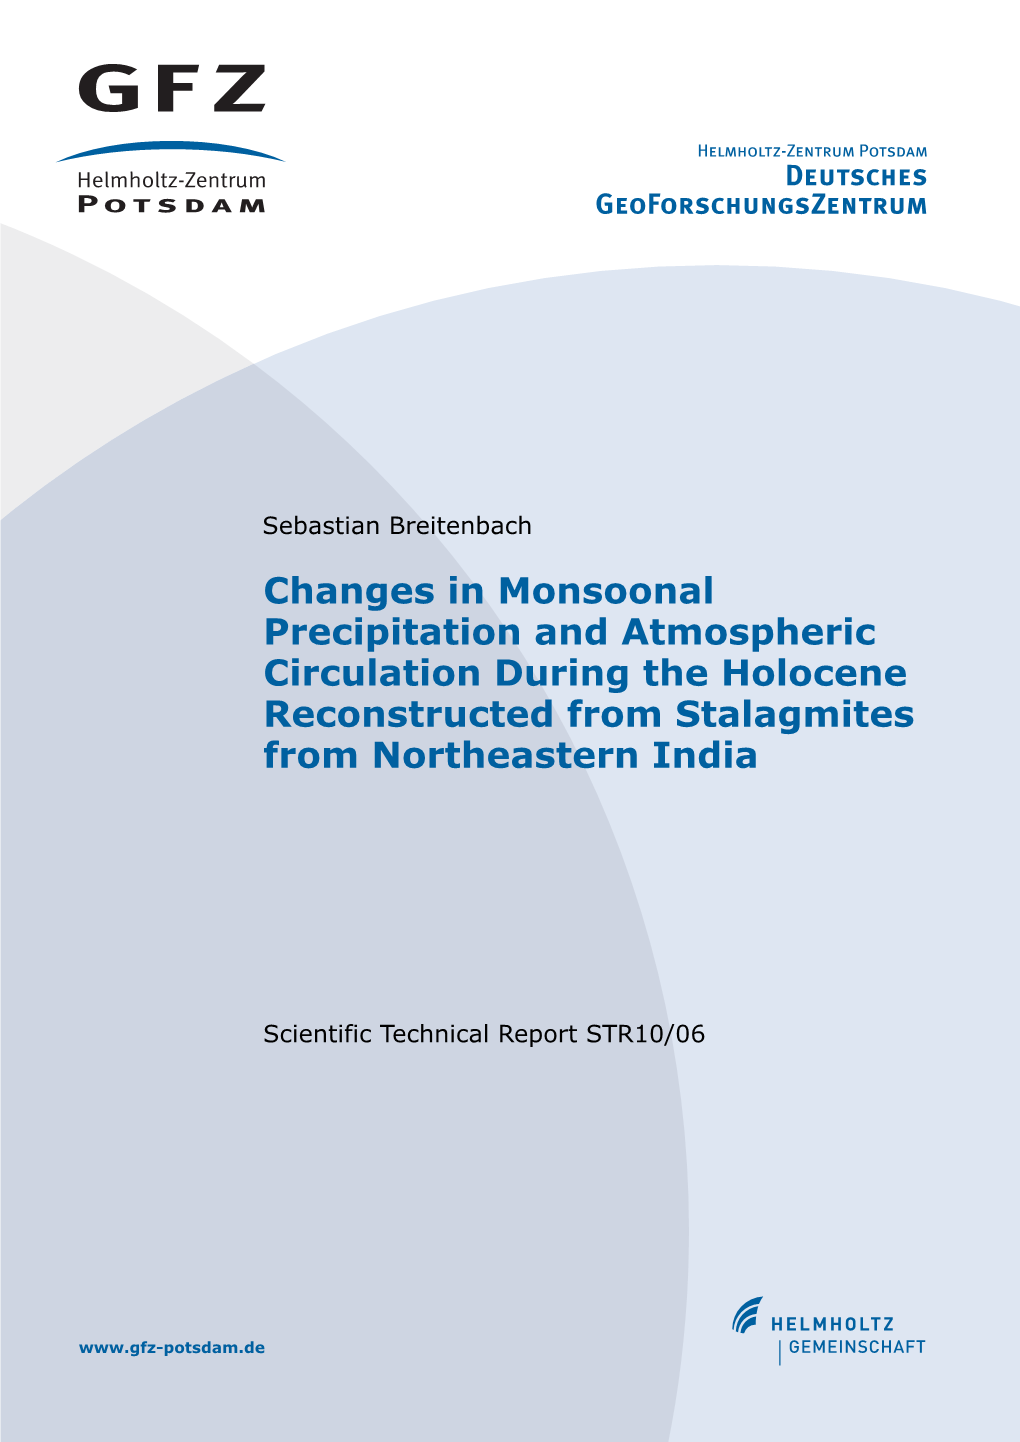 Changes in Monsoonal Precipitation and Atmospheric Circulation During the Holocene Reconstructed from Stalagmites from Northeastern India